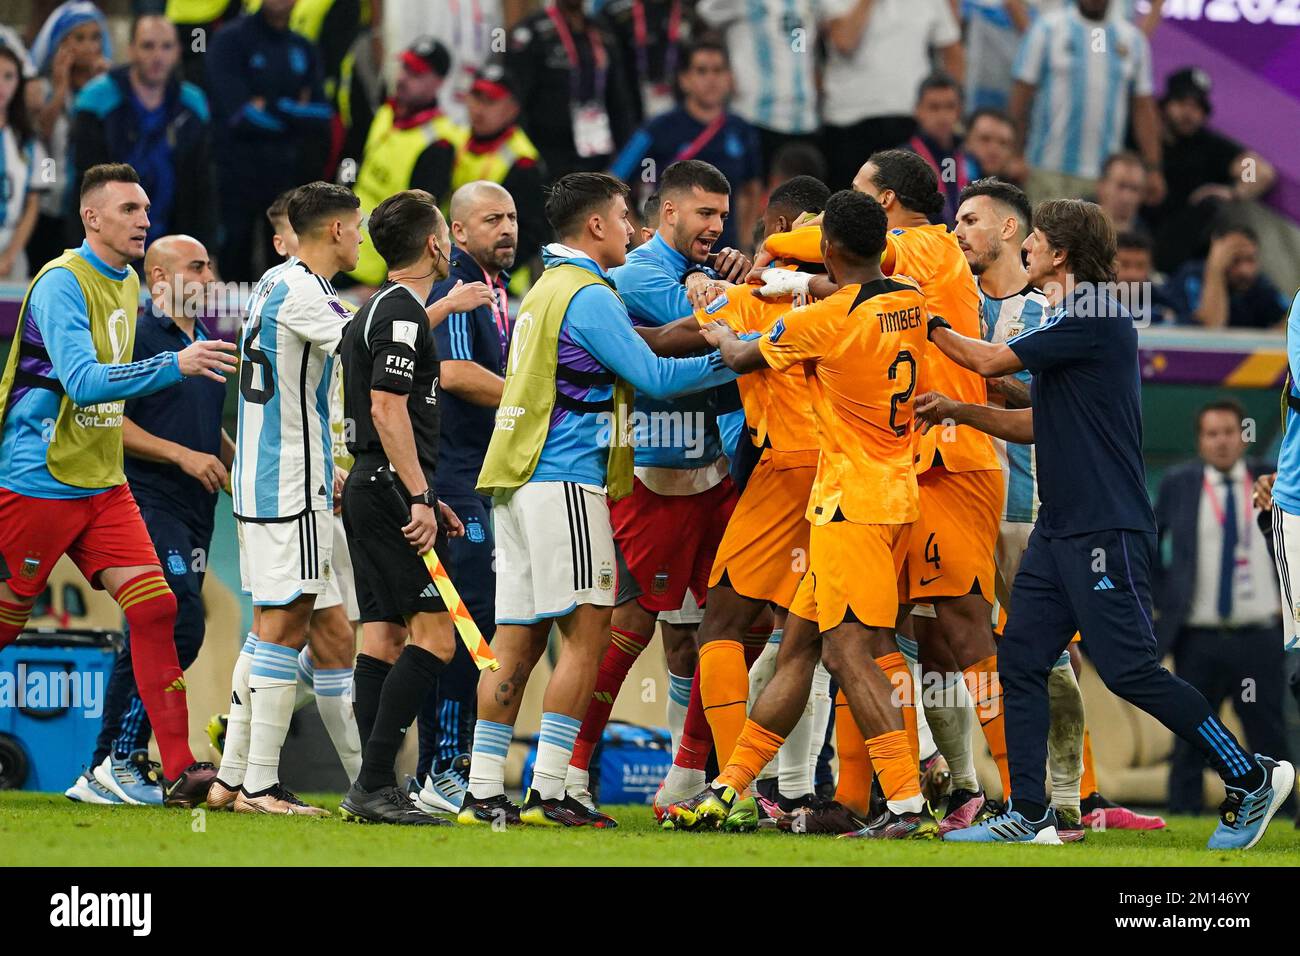 LUSAIL, QATAR - DECEMBER 9: Argentina team and Netherlands team argue during the FIFA World Cup Qatar 2022 quarter final match between Netherlands and Argentina at Lusail Stadium on December 09, 2022 in Lusail, Qatar. (Photo by FlorenciaTan Jun/Pximages) Credit: Px Images/Alamy Live News Stock Photo